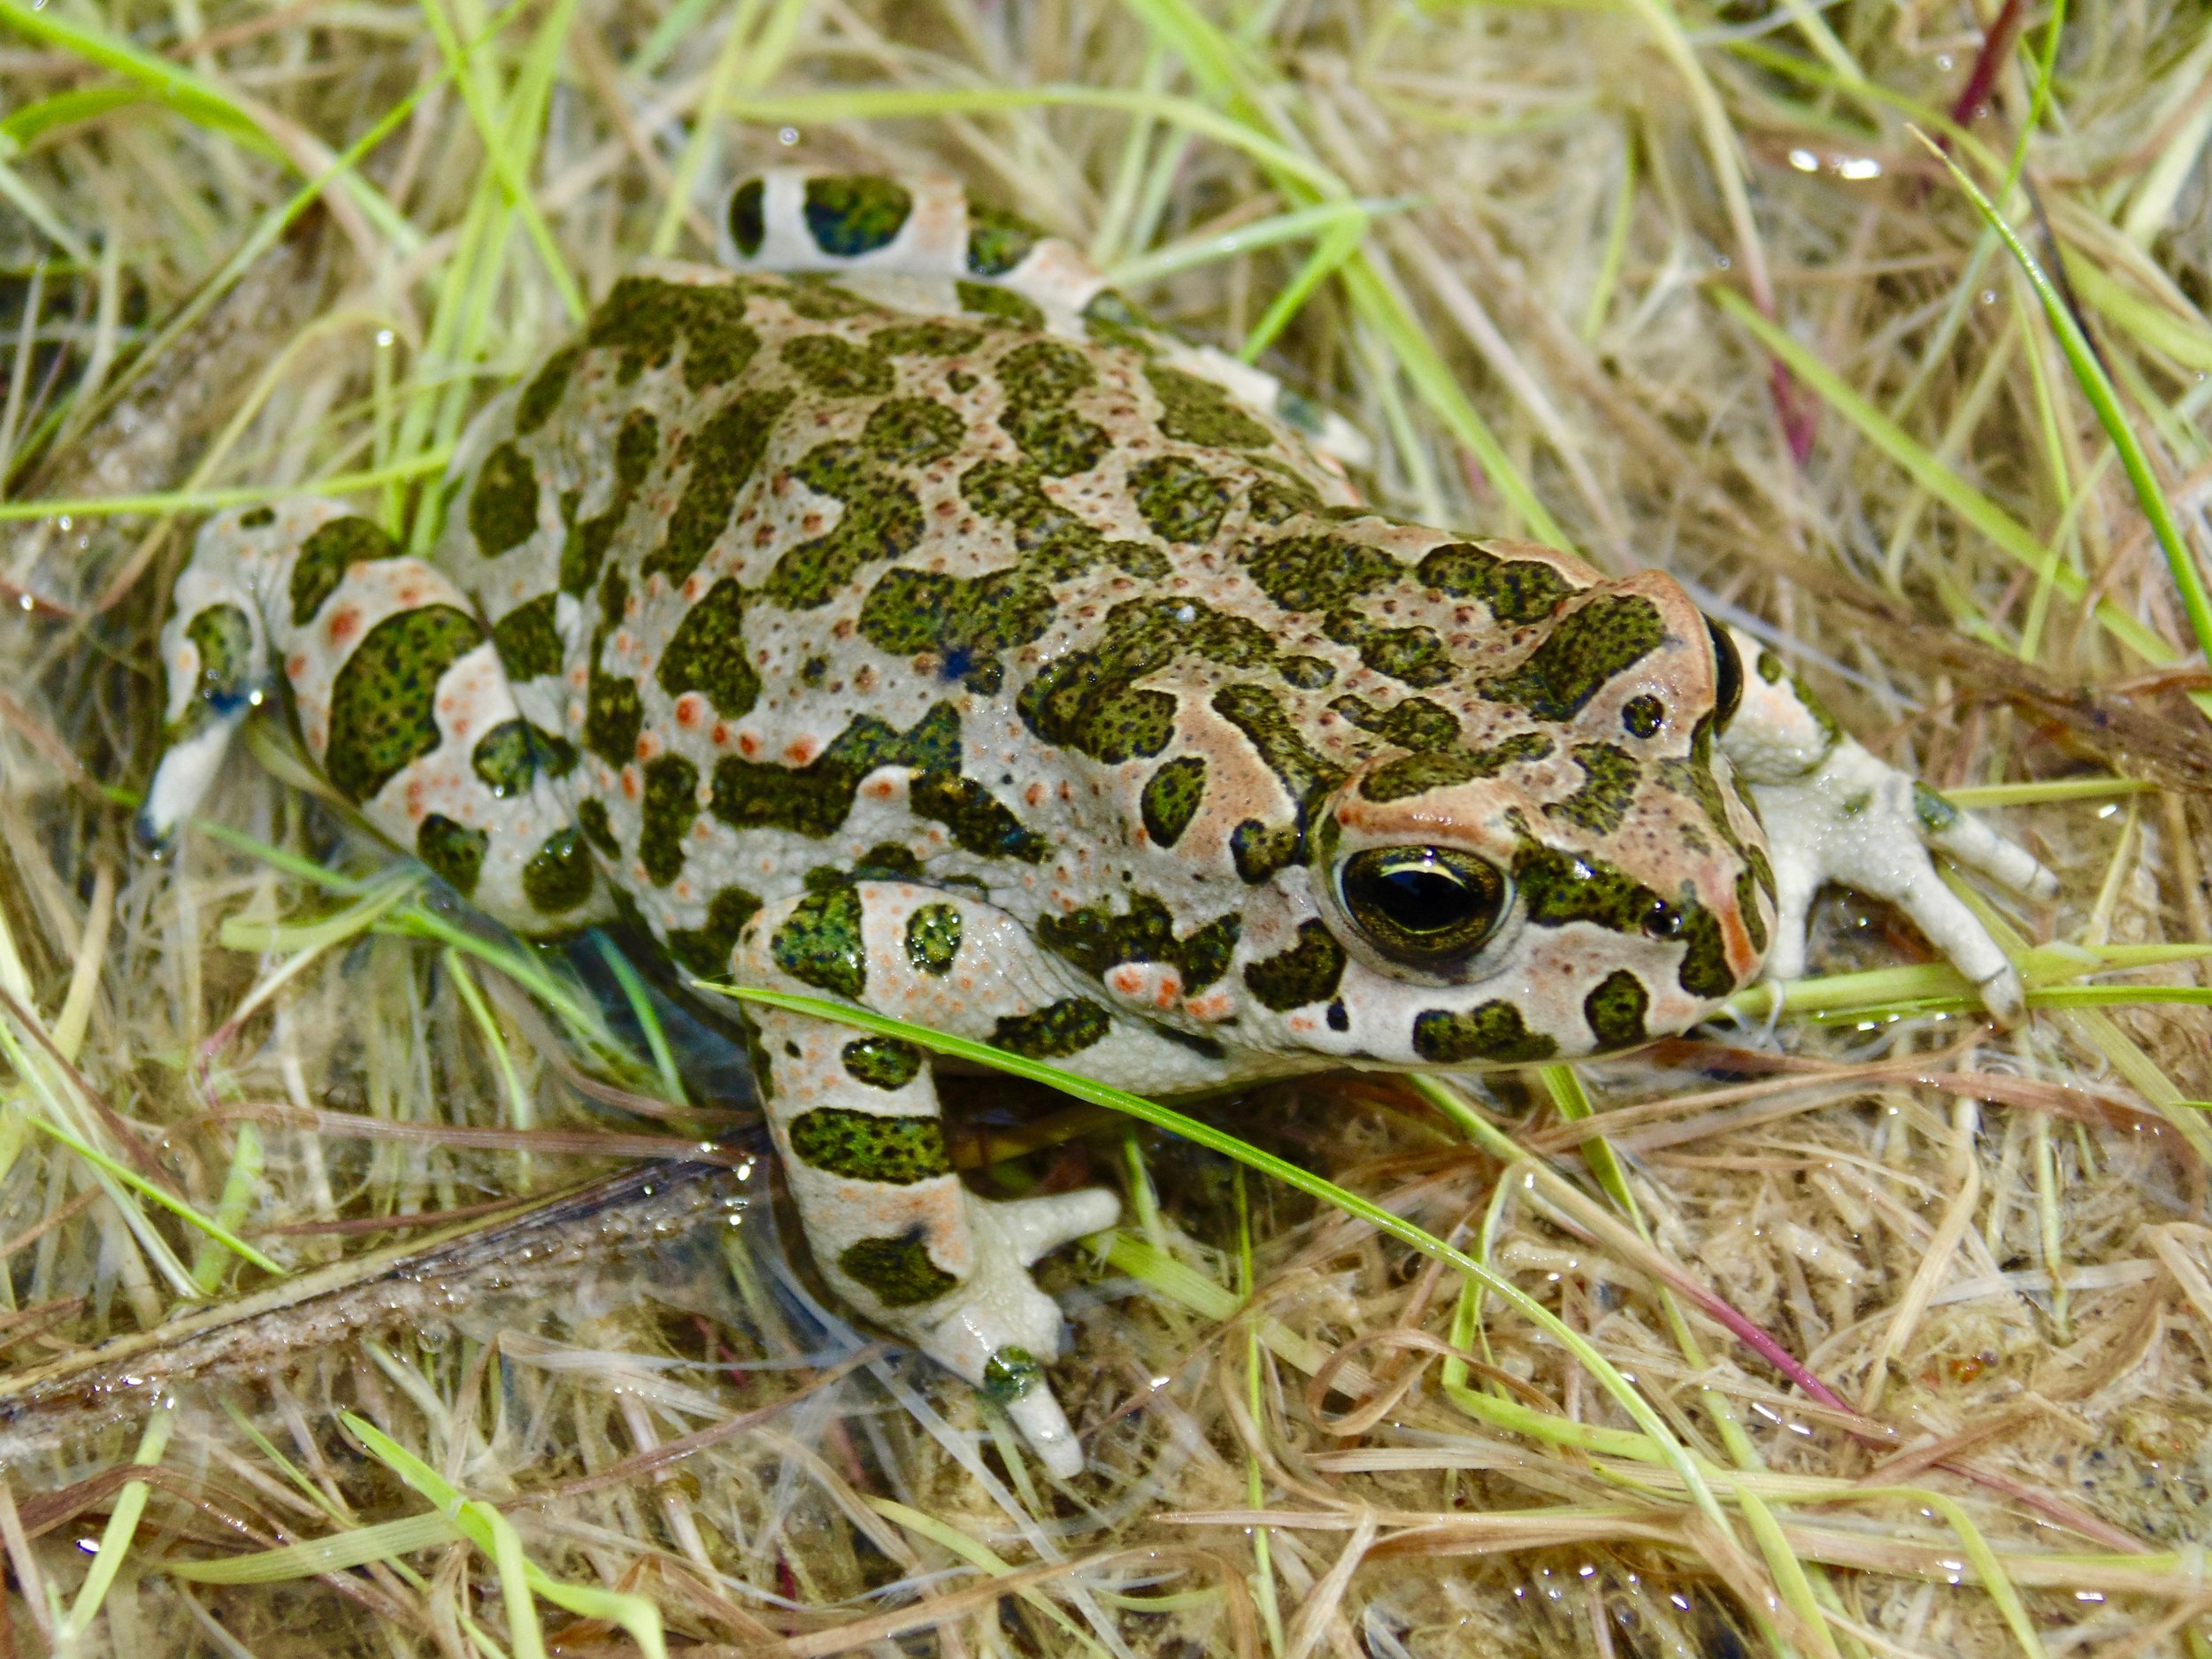    A specimen of a European Green Toad, Bufotes viridis, from the island of Kythera.   